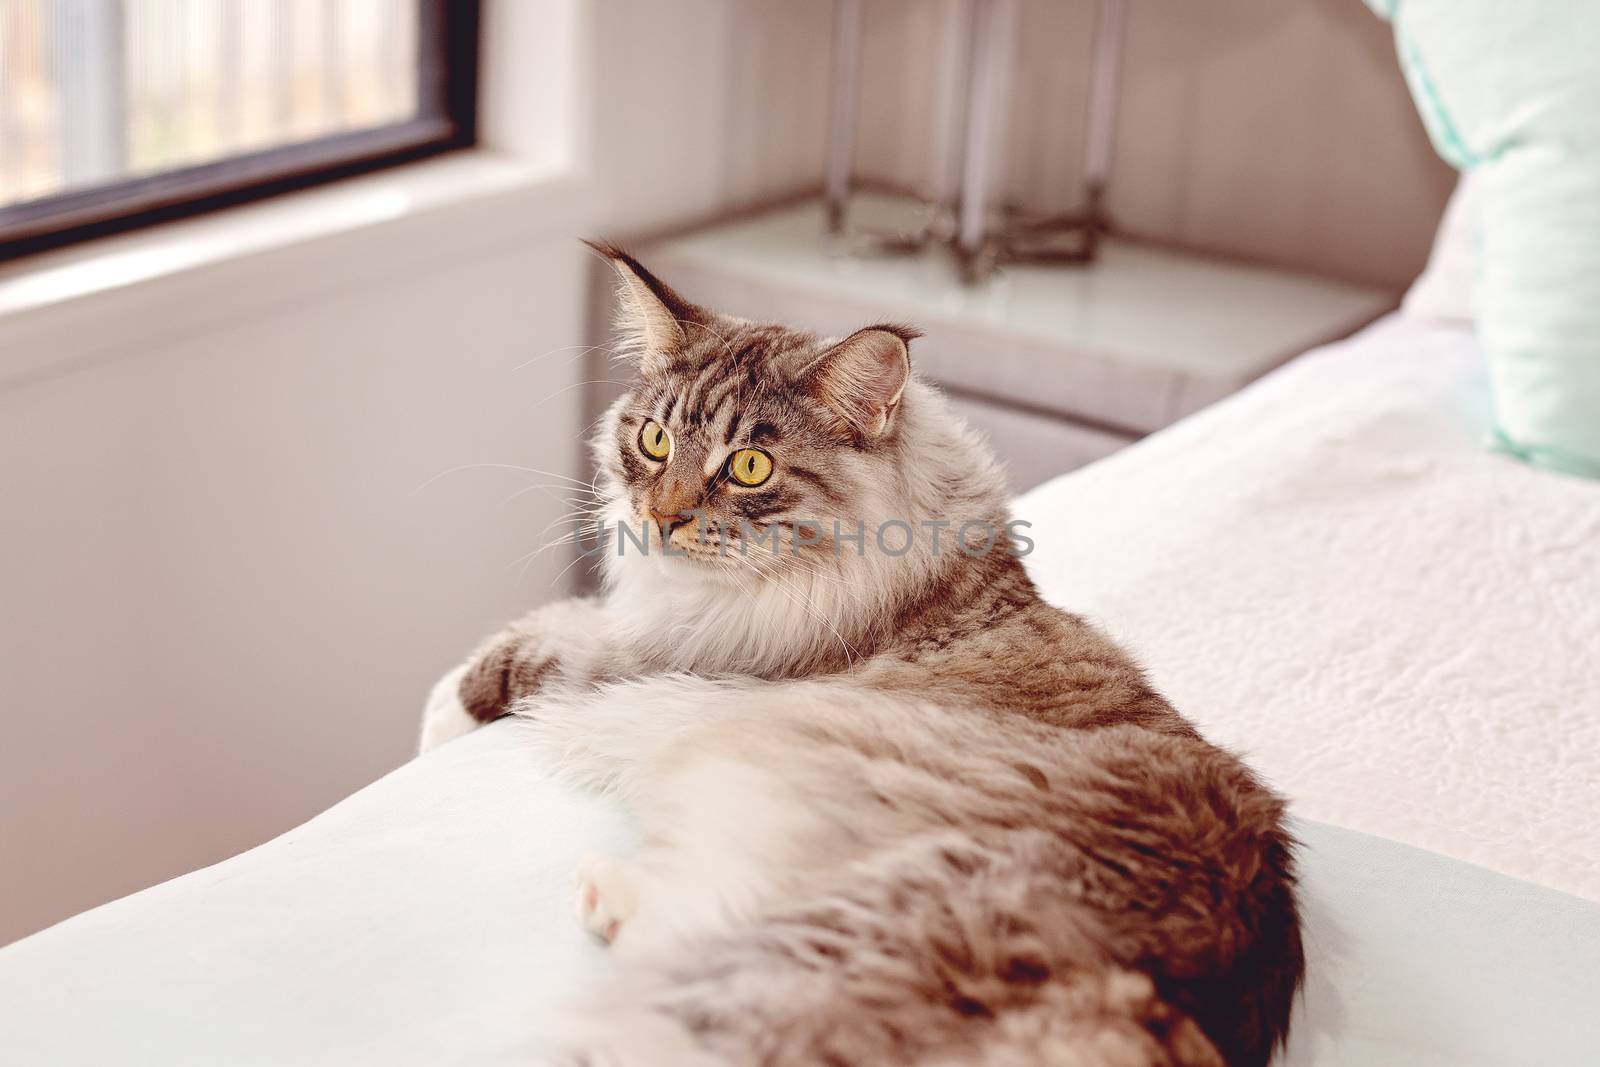 Large fully grown brown and white Main Coon cat lying on a bed in a home bedroom